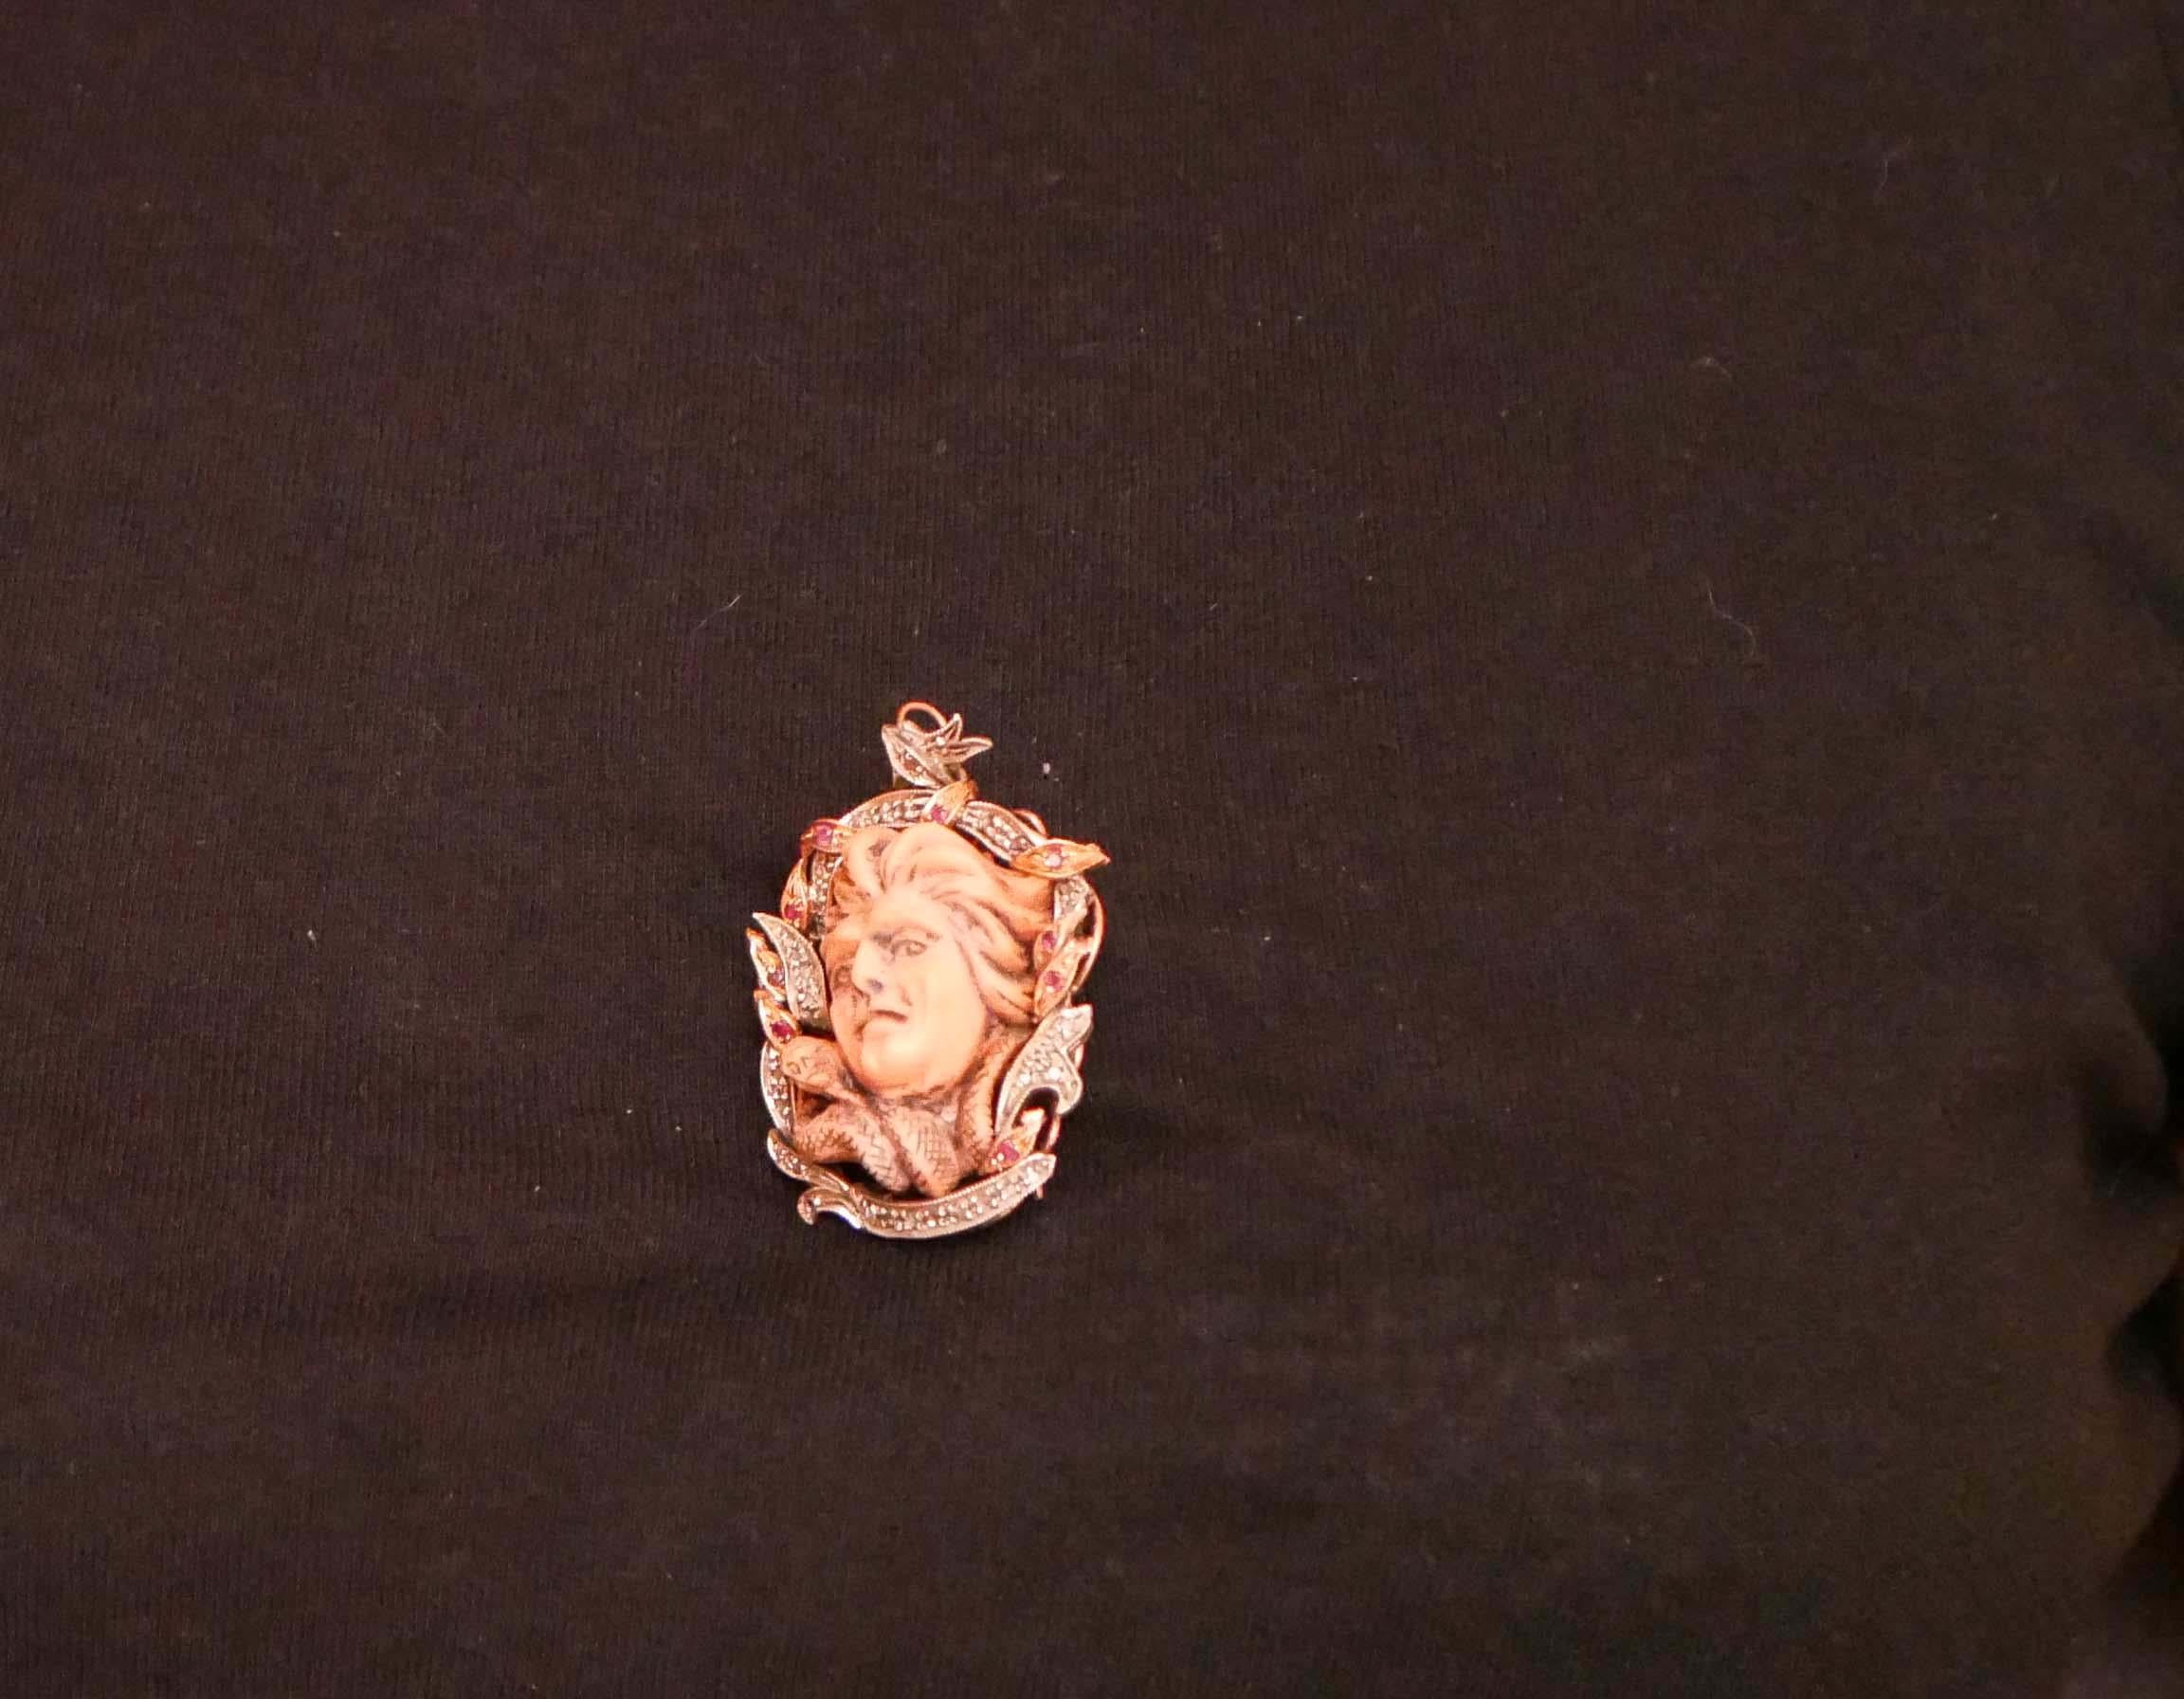 Coral, Rubies, Diamonds, Rose Gold and Silver Brooch/Pendant. 2